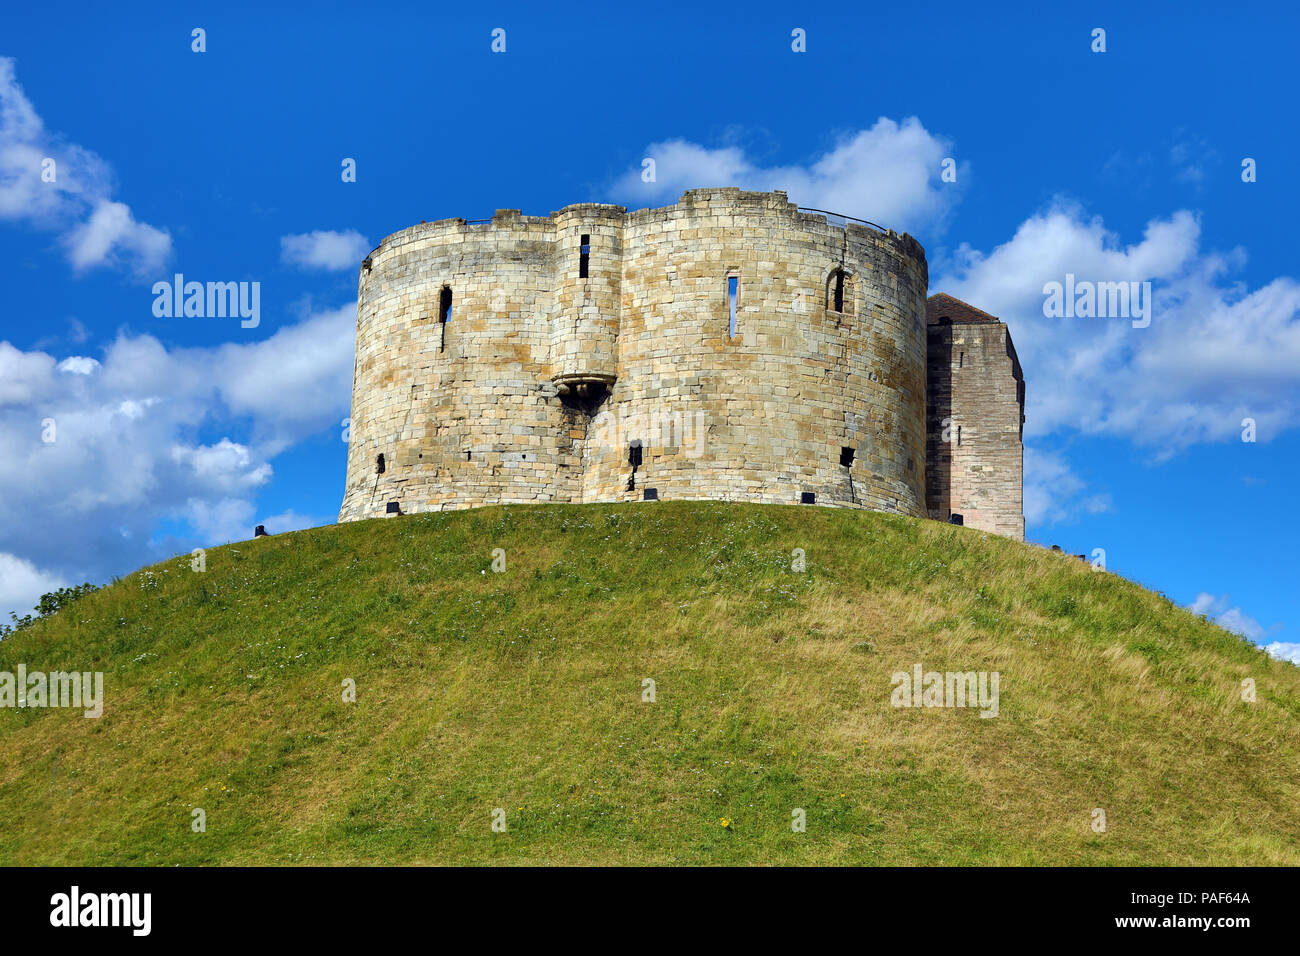 Clifford's Tower at York Castle in York, Yorkshire, England Stock Photo